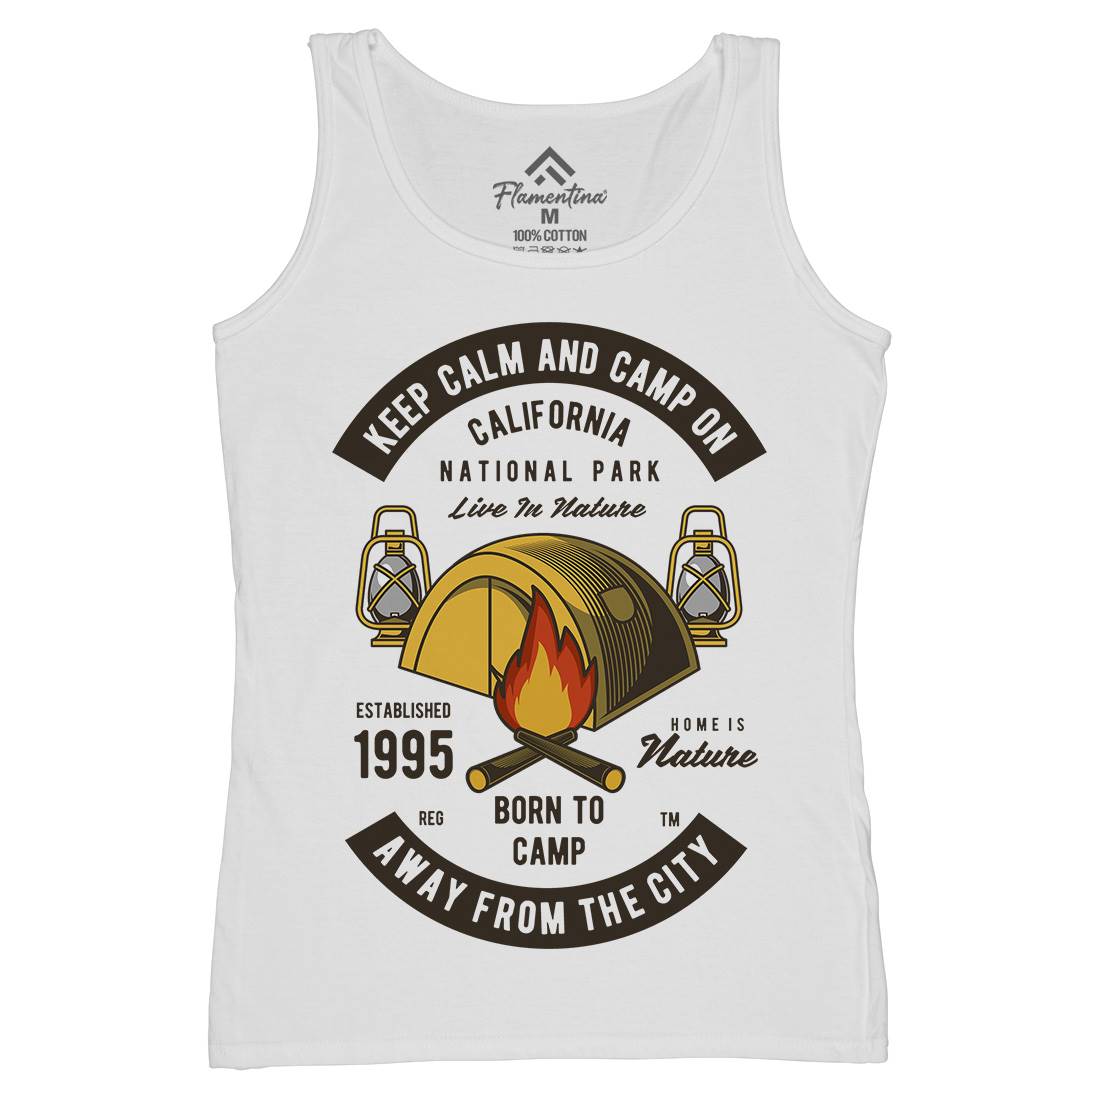 Keep Calm And Camp Womens Organic Tank Top Vest Nature C383